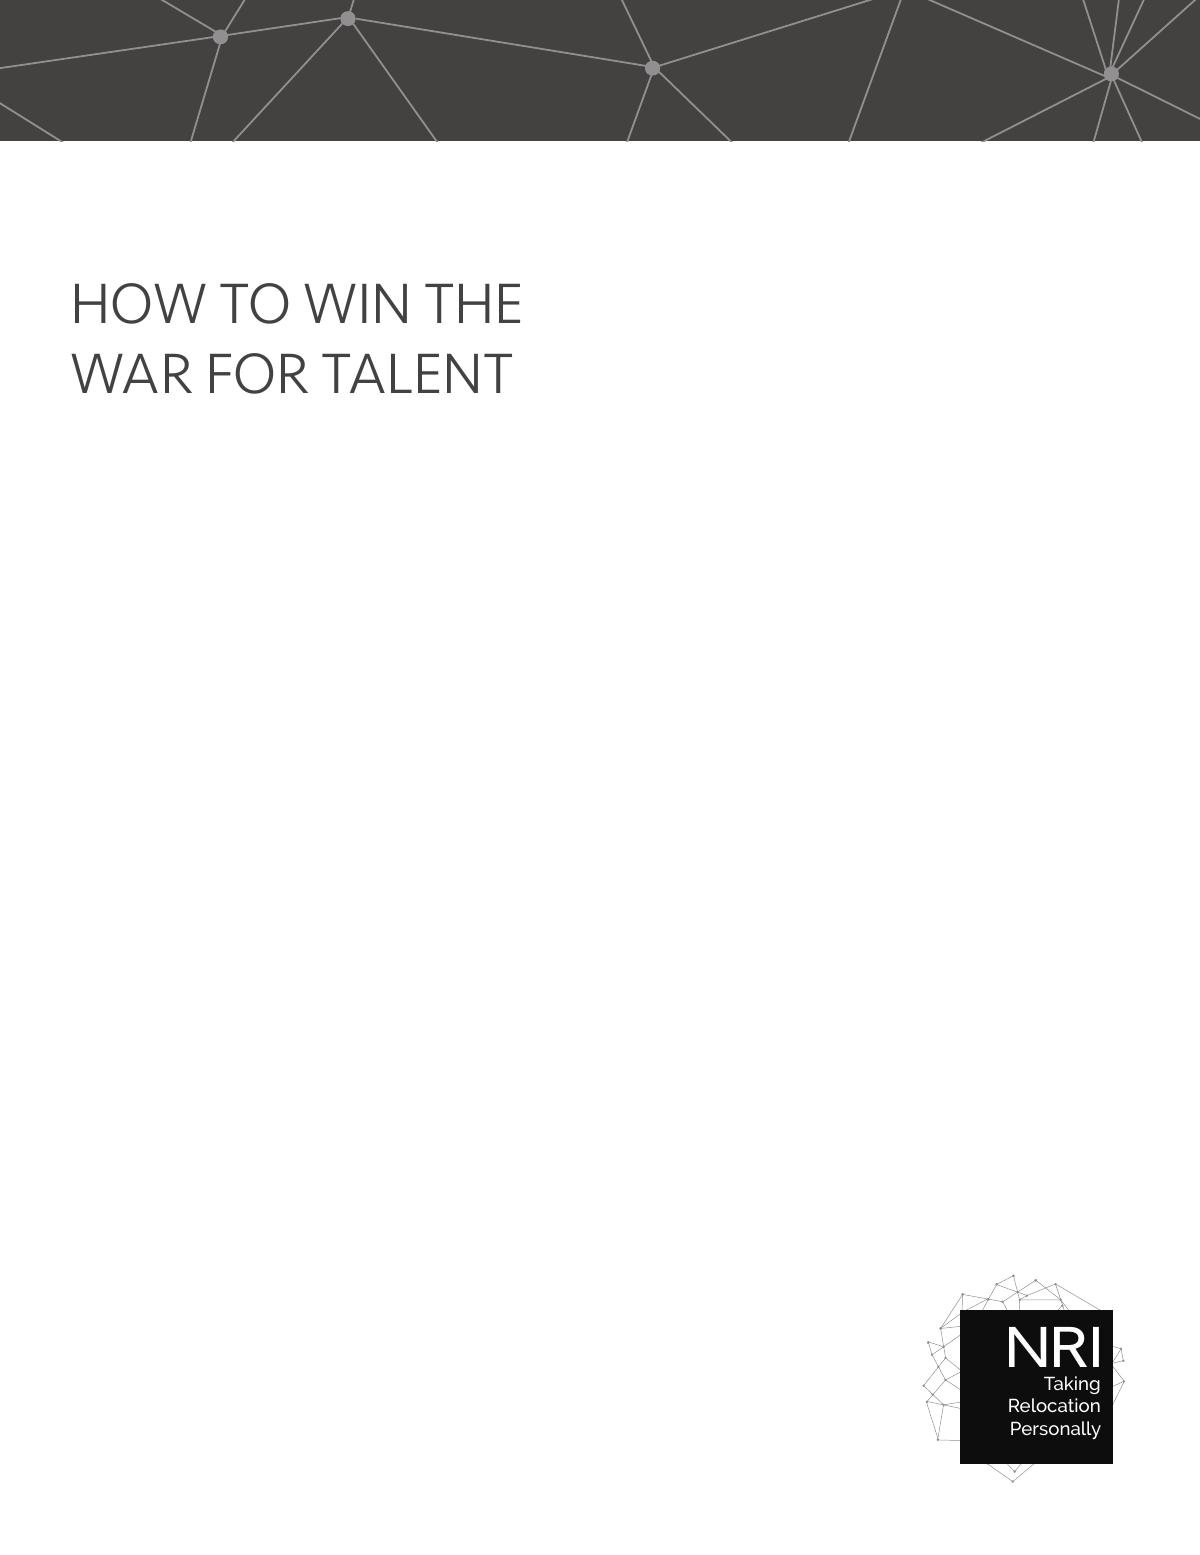 How to Win the War for Talent with Relocation